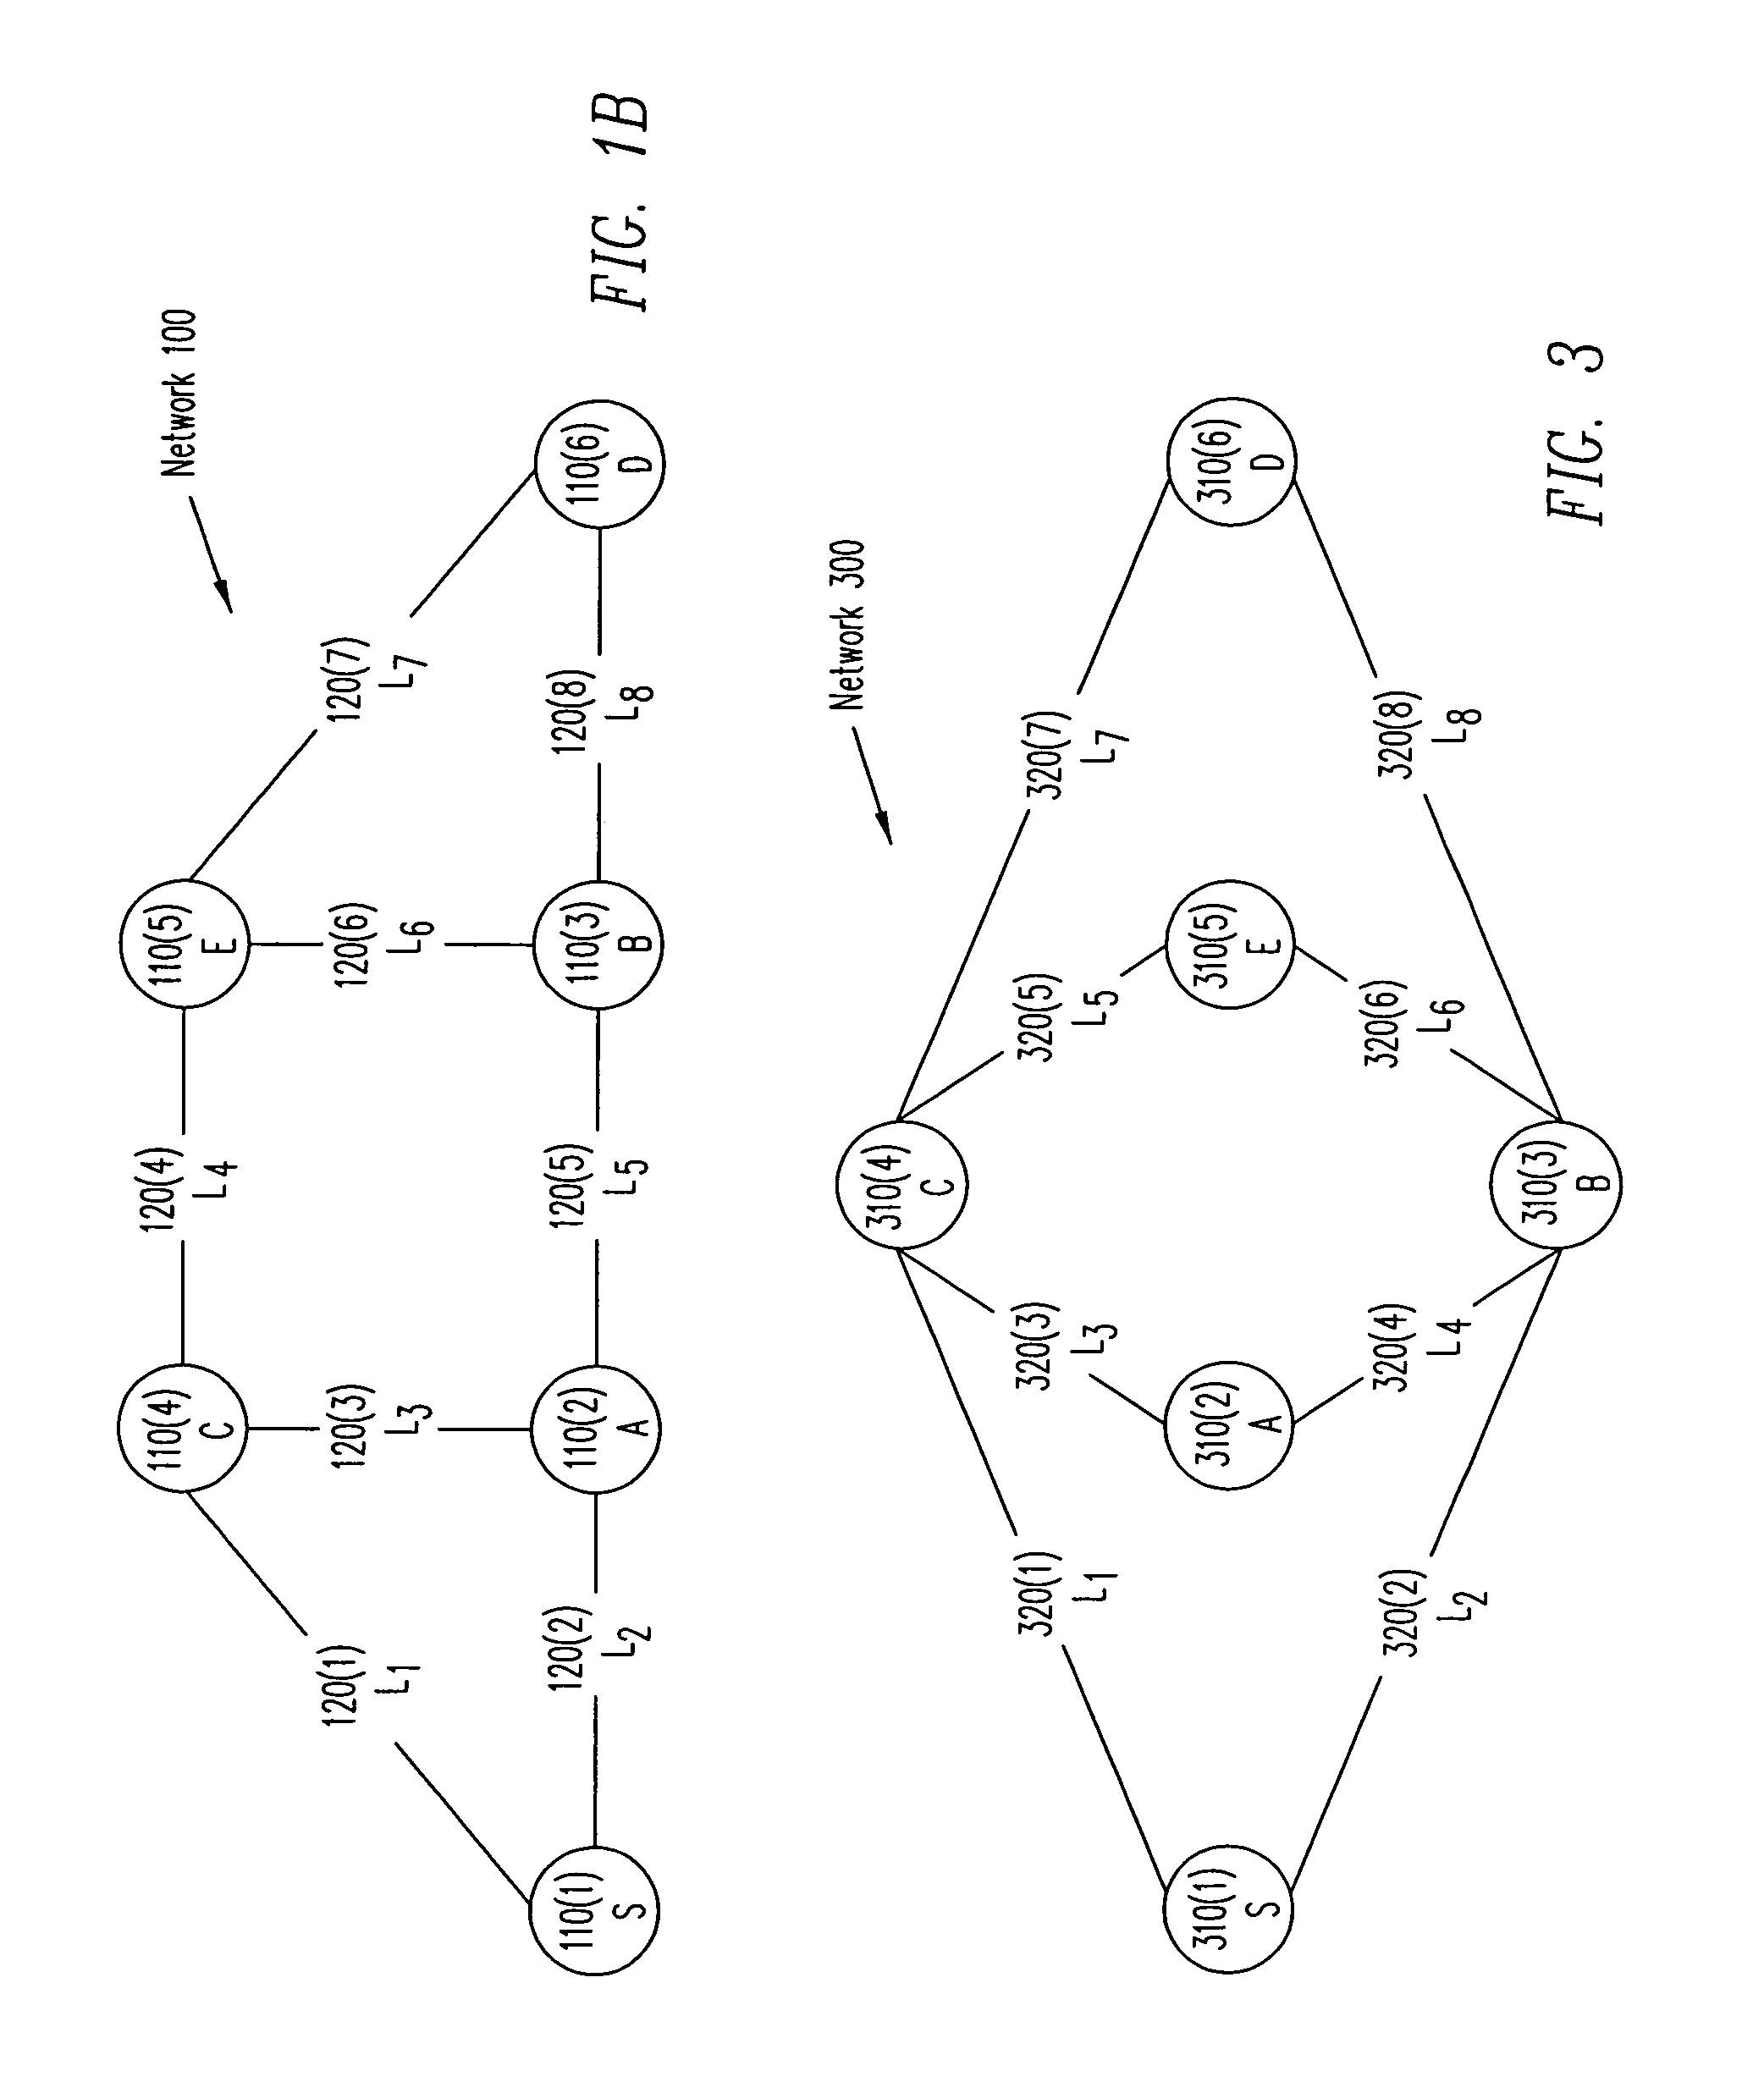 Method and apparatus for uninterrupted packet transfer using replication over disjoint paths